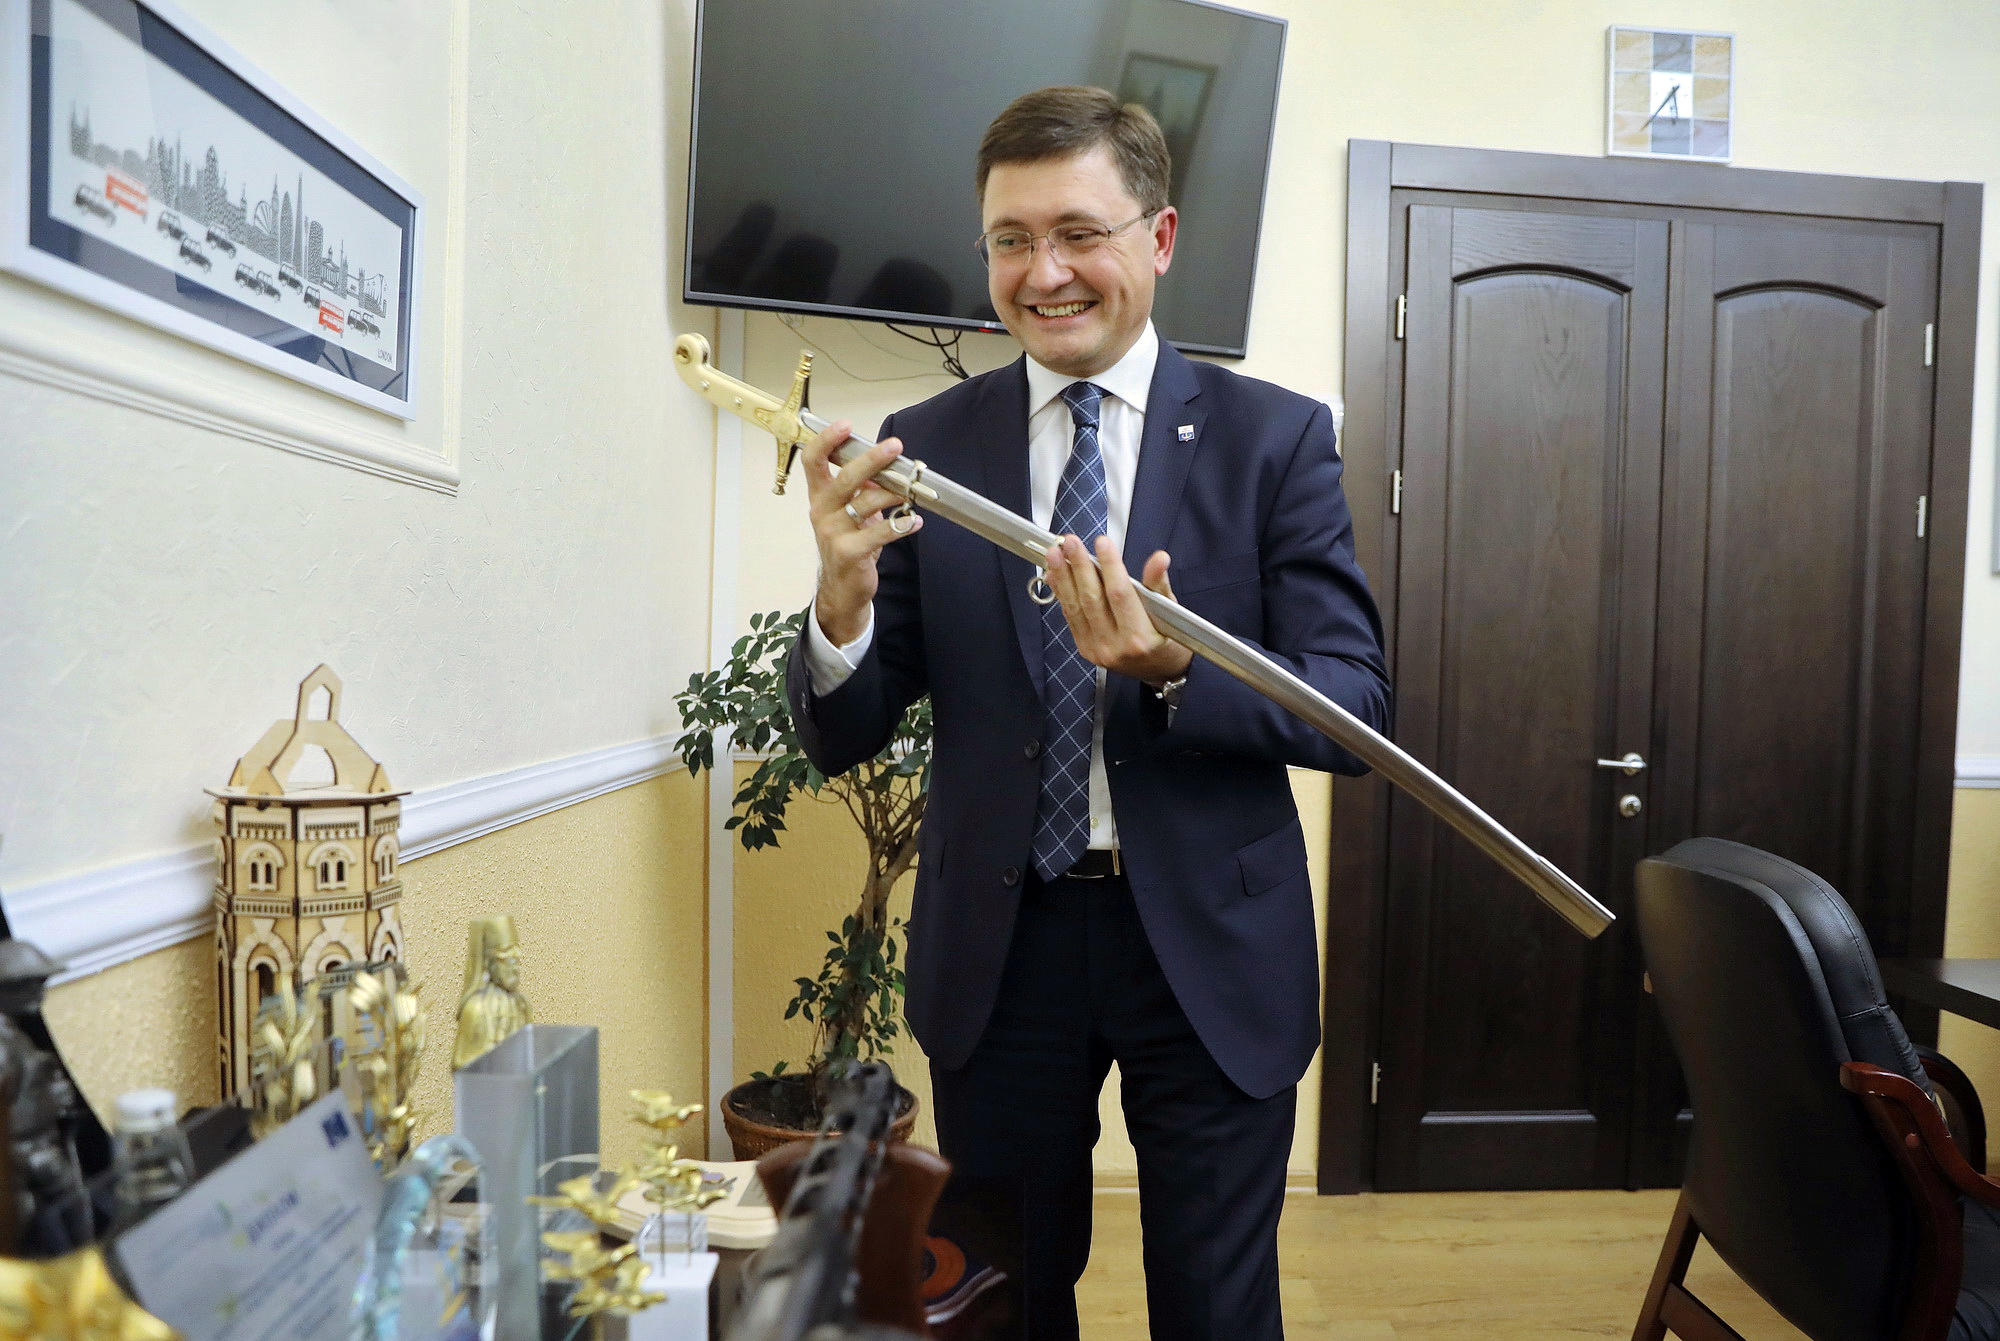 Mariupol mayor wants to put his city on map as tourism, investment destination - Kyiv Post